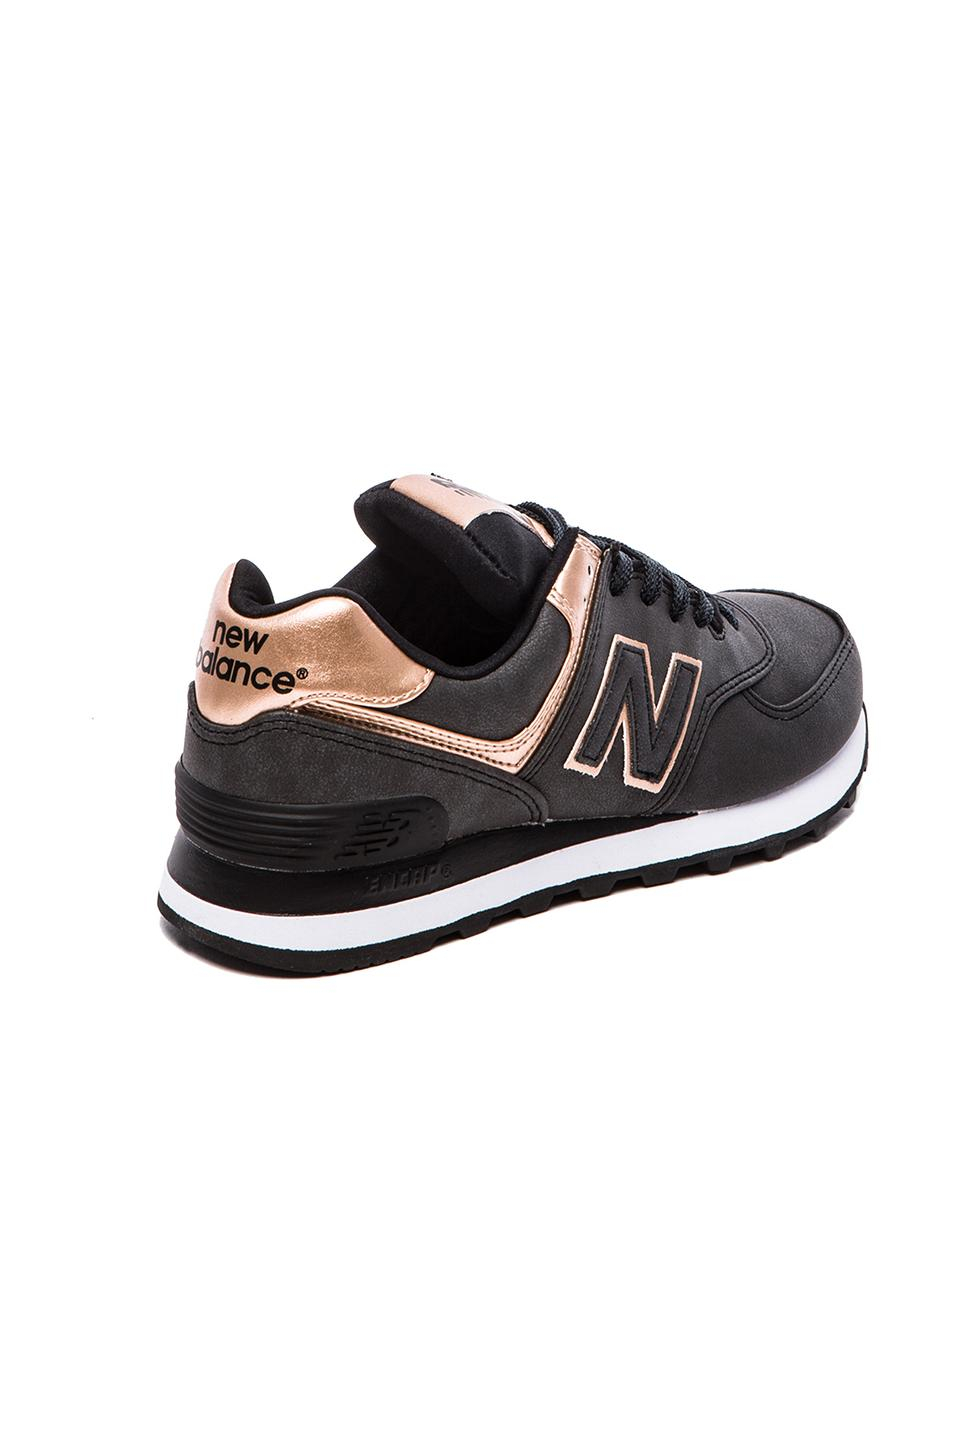 new balance women's 574 precious metals casual sneakers from finish line